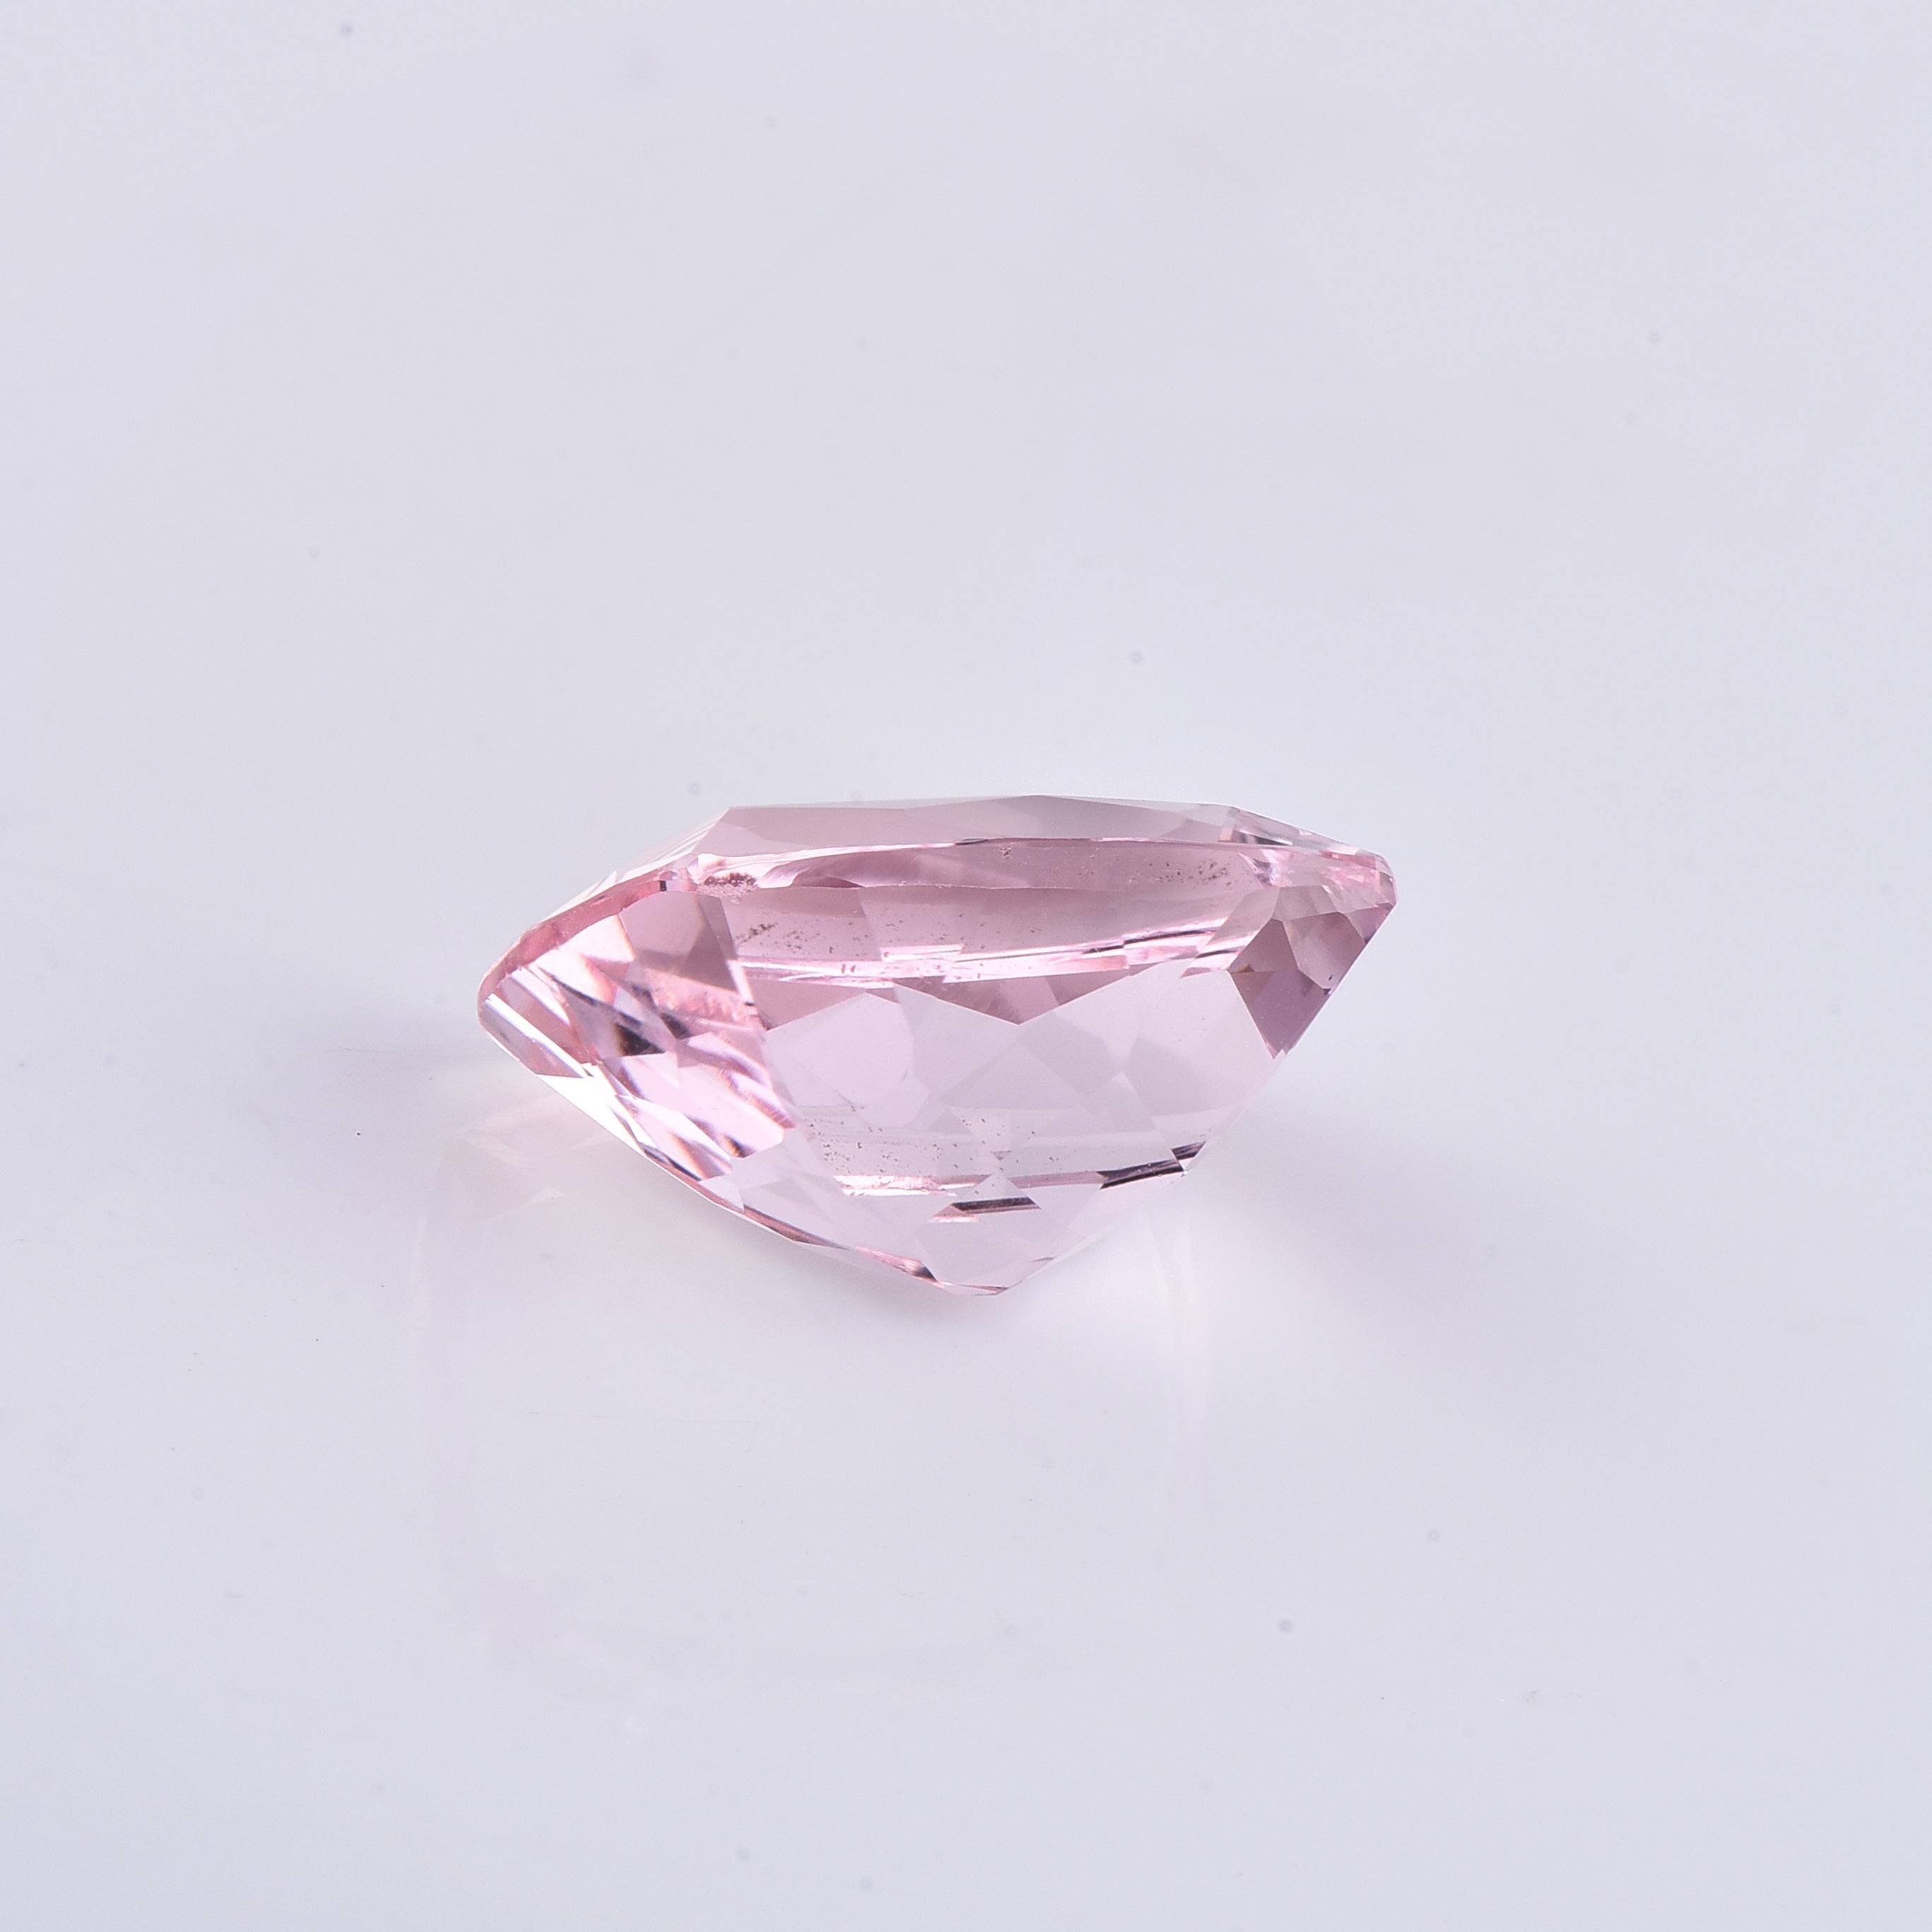 Create a Jewellery of your choice with this 16 x 12 mm Cushion Cut Natural Morganite colour stone.

Stone Information: Natural Morganite 
Shape/Cut: Cushion Cut
Color: Light Pink
Dimensions (mm): 16.00 x 12.00 x 8.60
Weight: 10.89ct

We follow